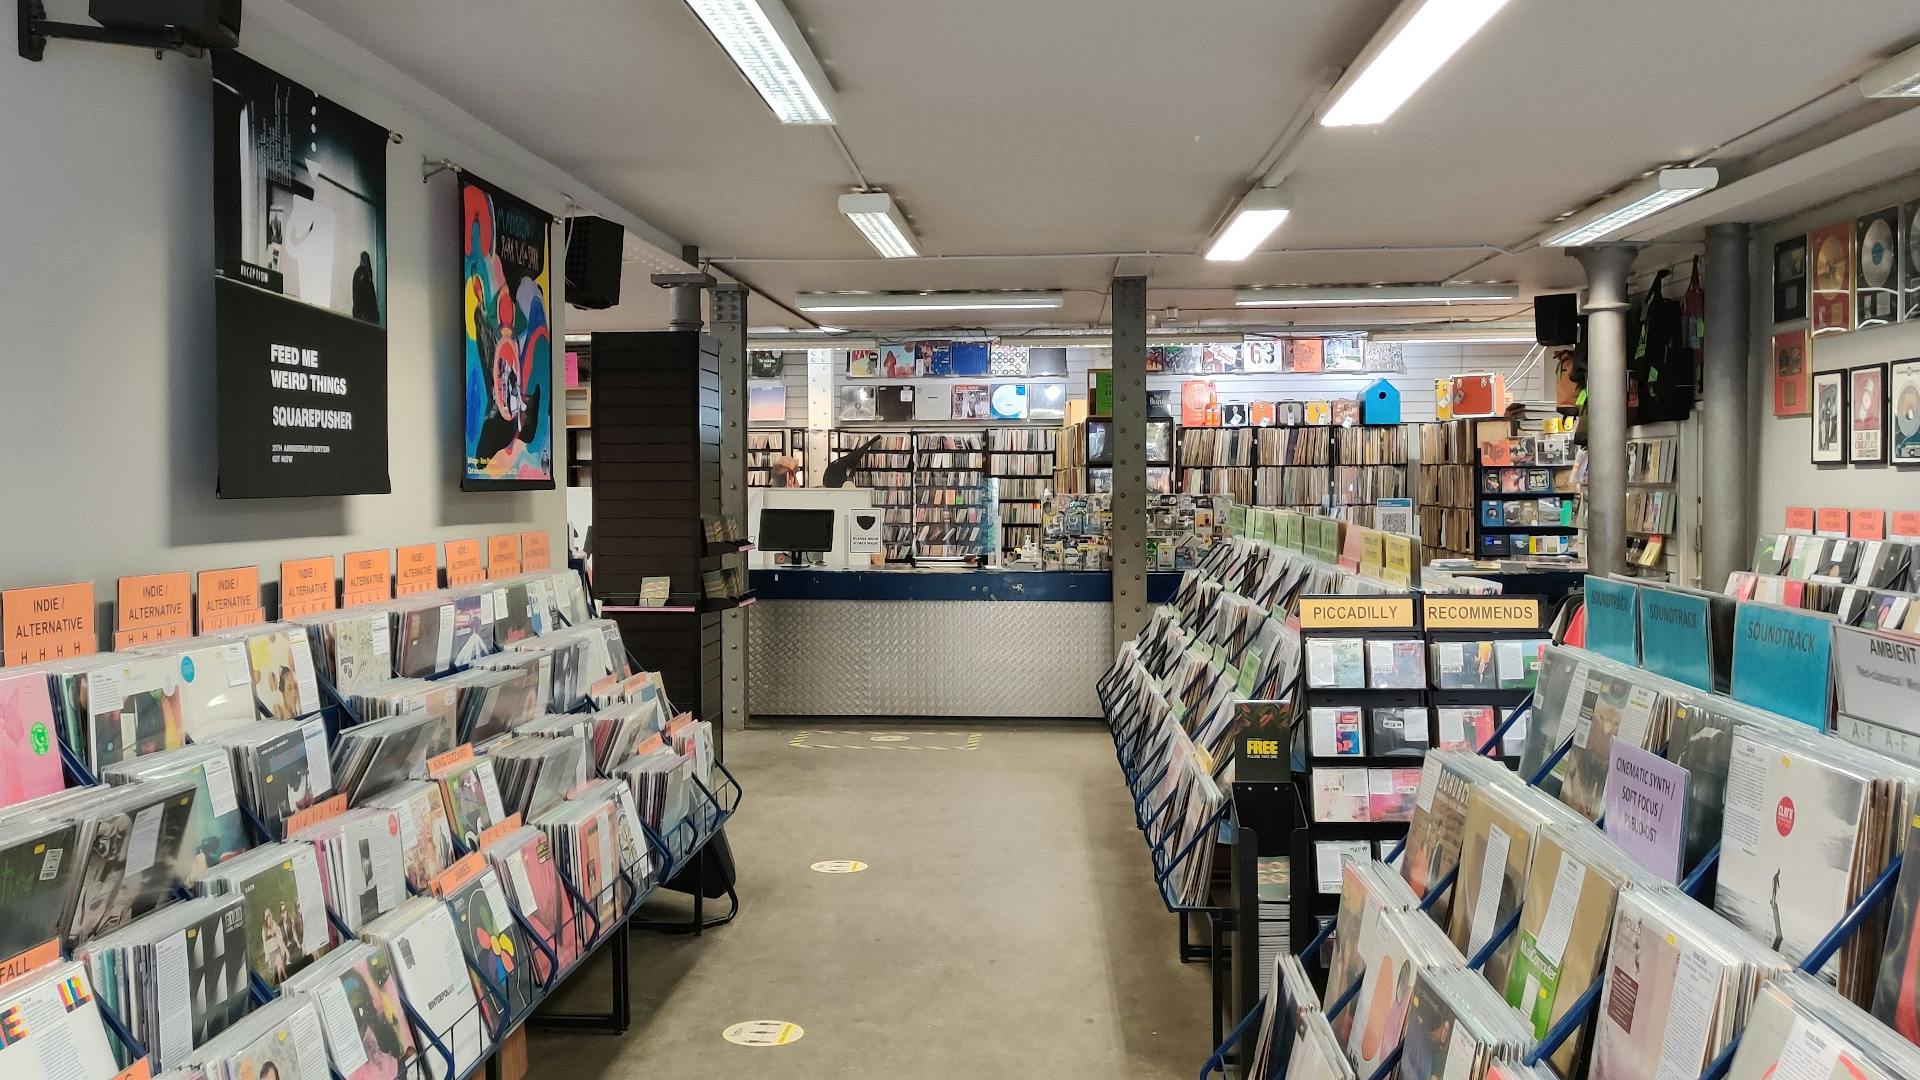 RSD Special Piccadilly Records recommends: Gabriels, Taylor Swift, Pixies, Blur + more